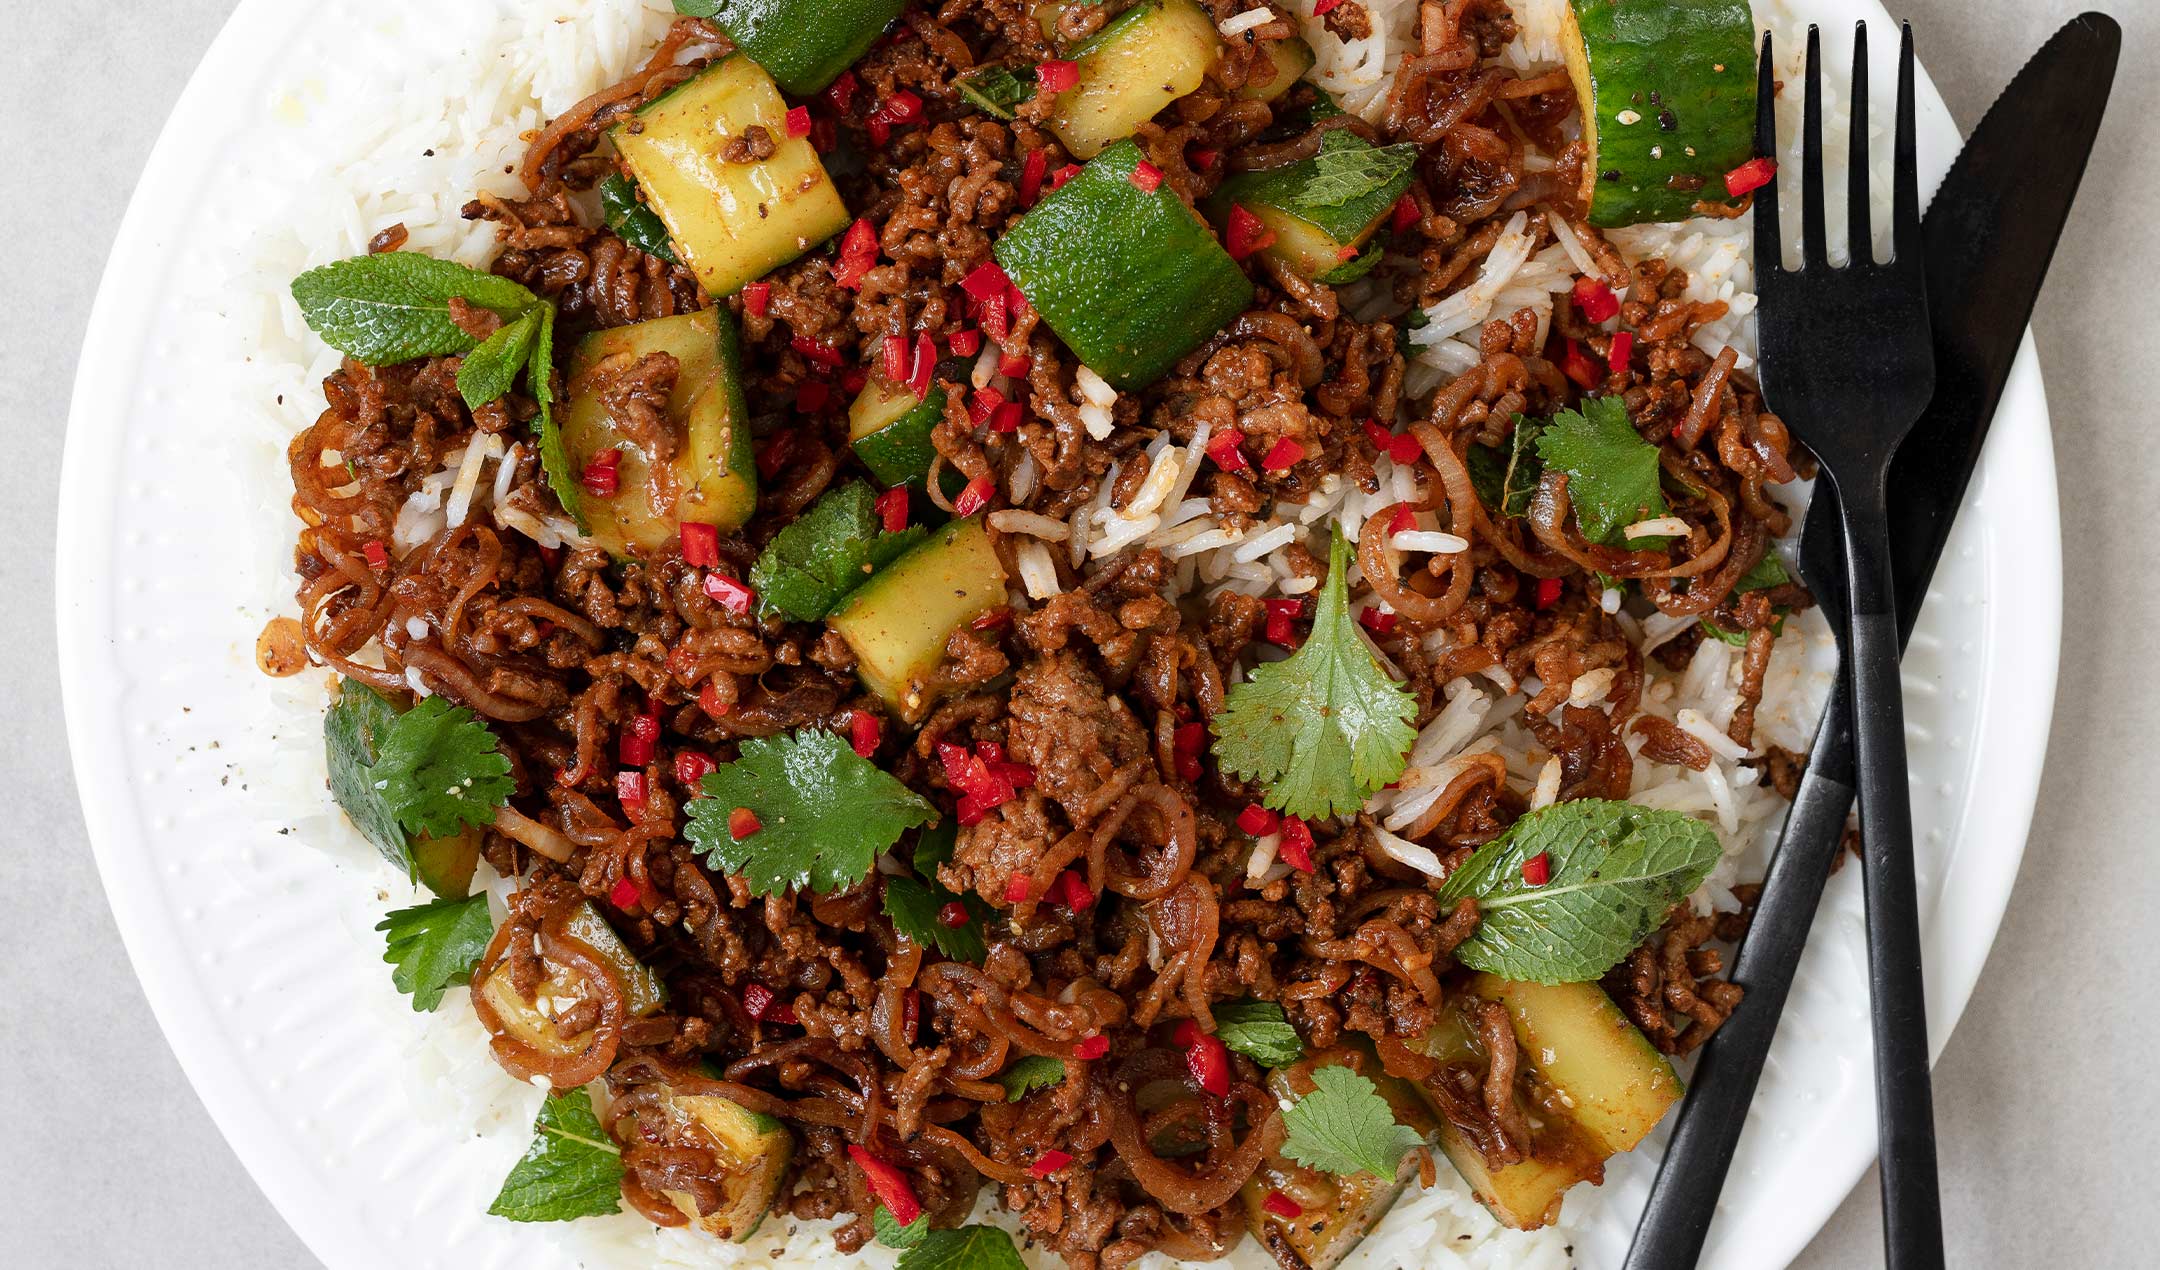 Spicy beef and crushed cucumber stir-fry